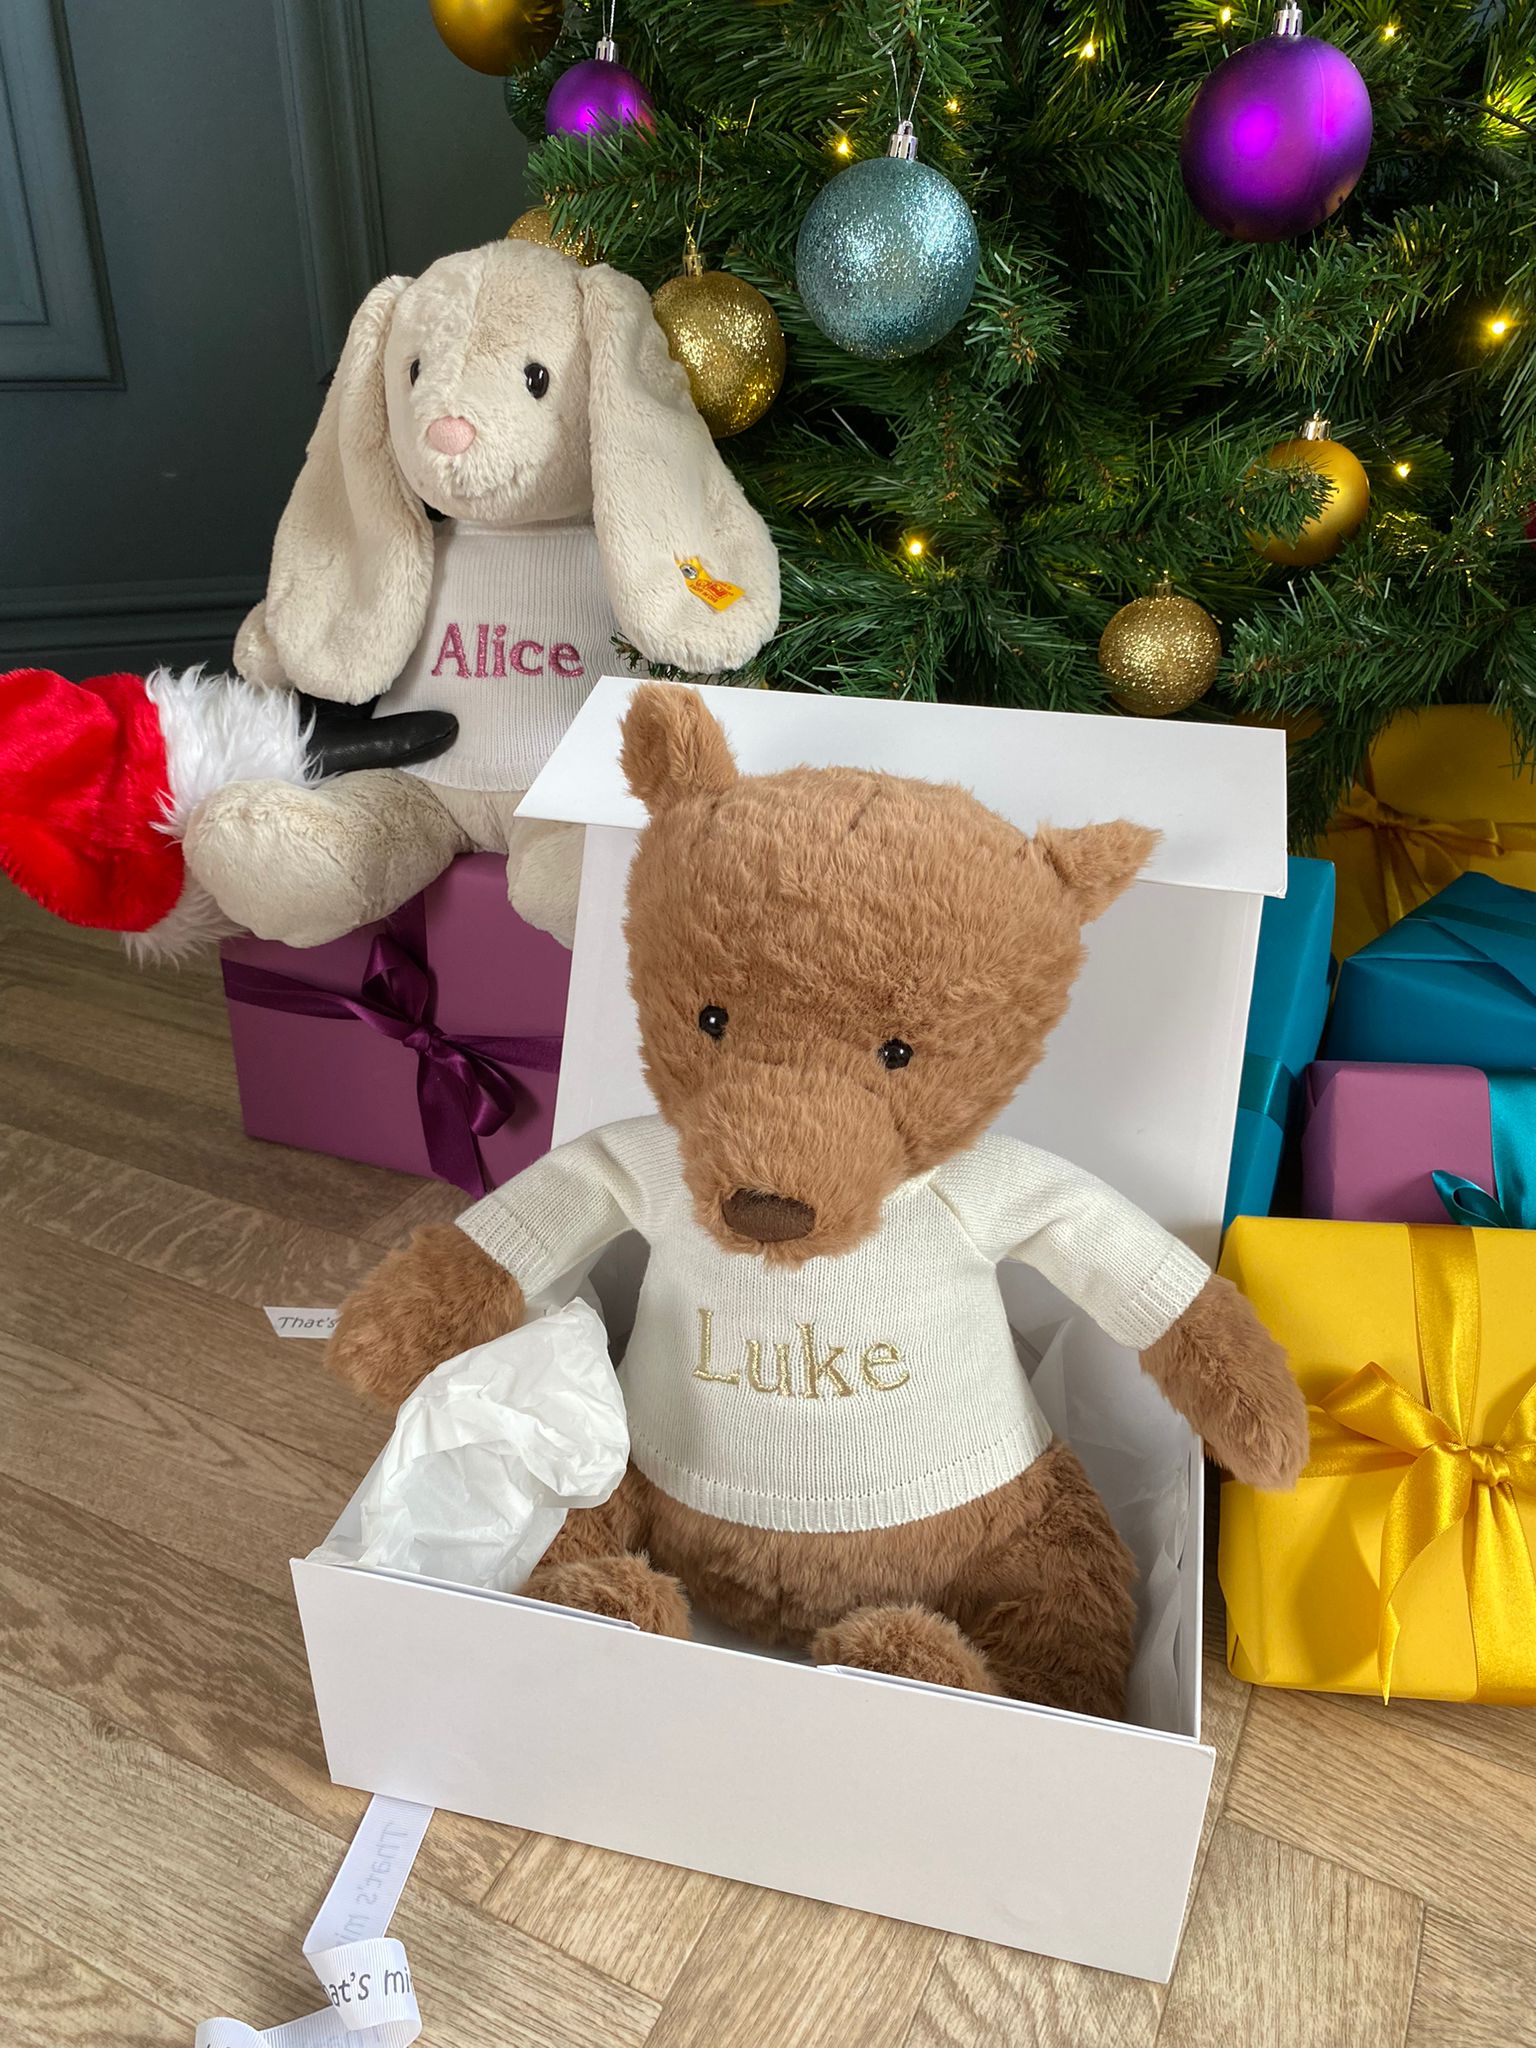 alice and luke personalised sweater teddy bear and bunny teddy